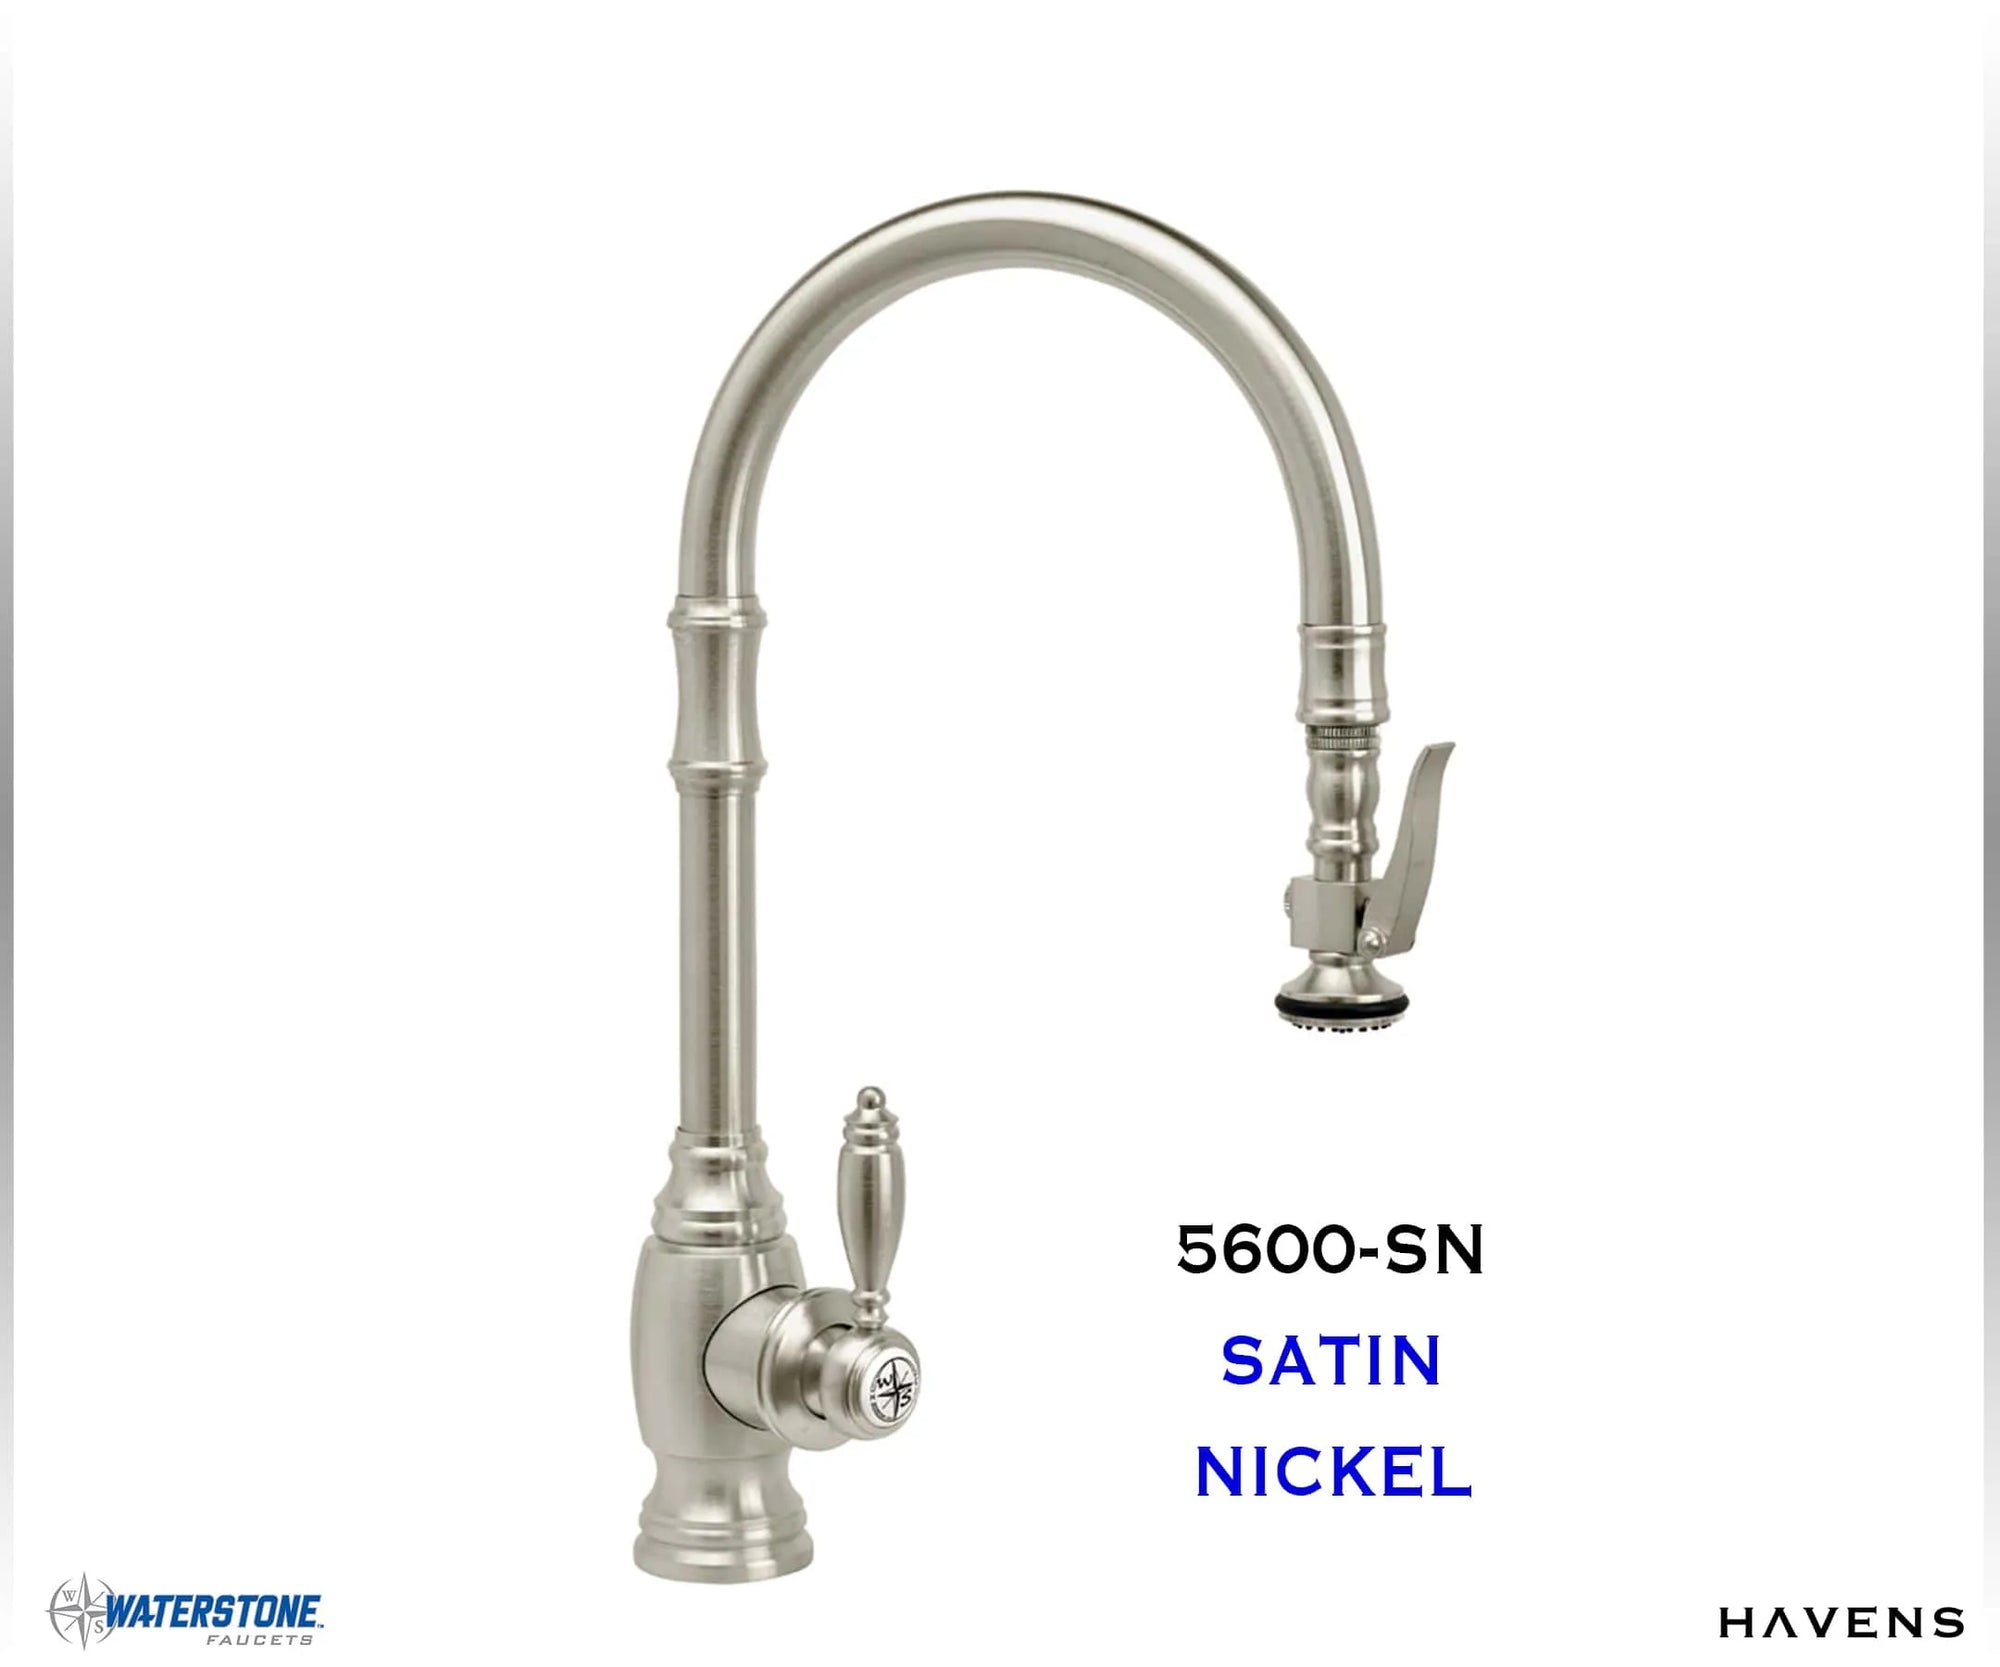 Waterstone Traditional PLP Pulldown Faucet 5610 (Angled Spout)